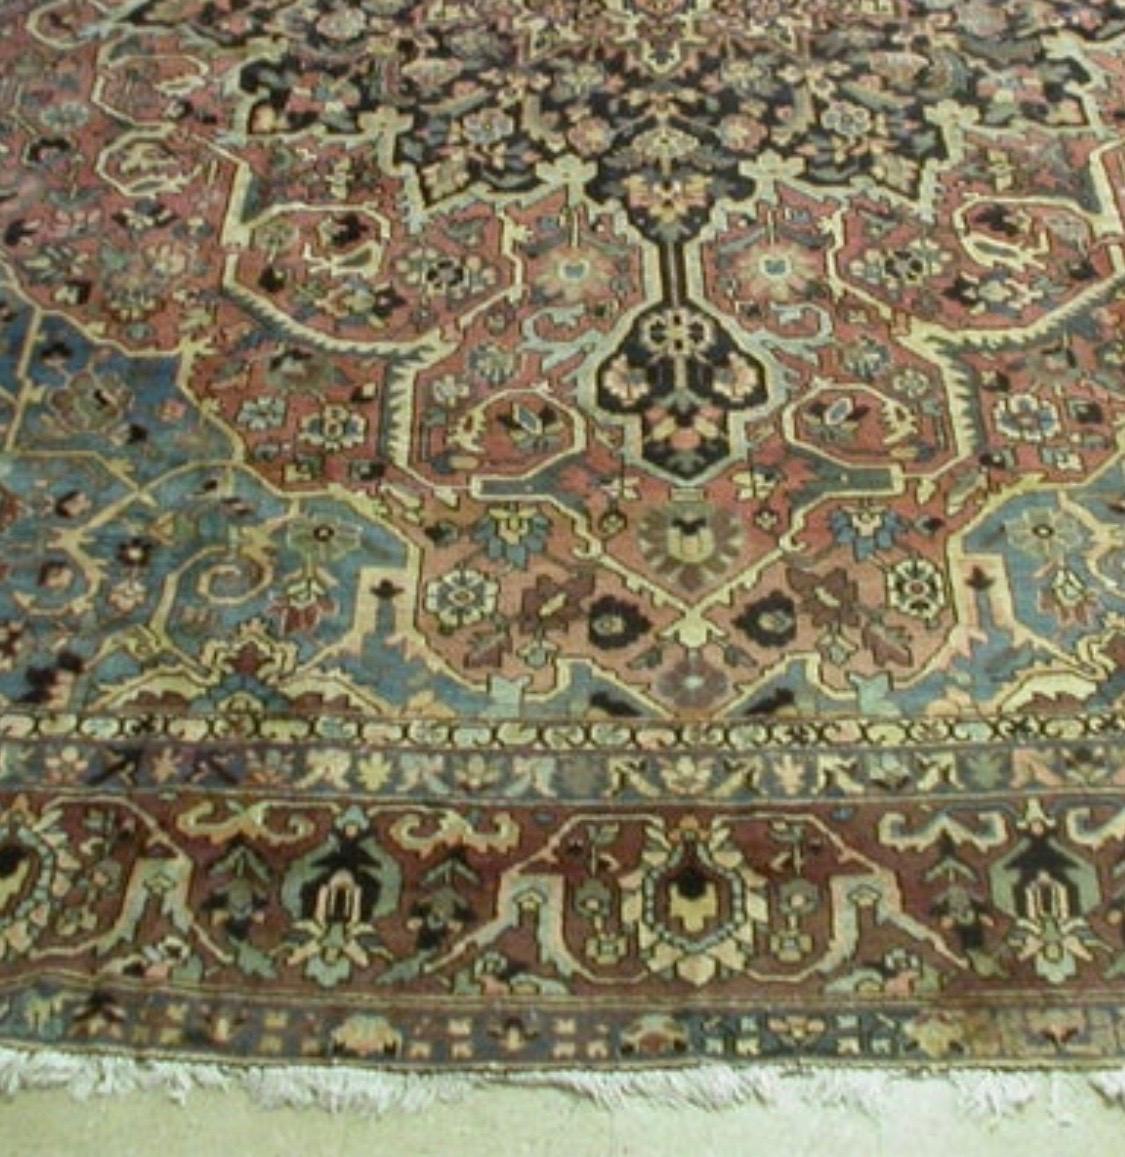 Antique Bakhtiari rugs were woven in Zagros Mountains of Iran, and mainly woven by villagers and nomads of the area. The pattern of Bakhtiari rugs is mainly geometric, sometimes semi-geometric, and seldom curvilinear. The designs tend to be very